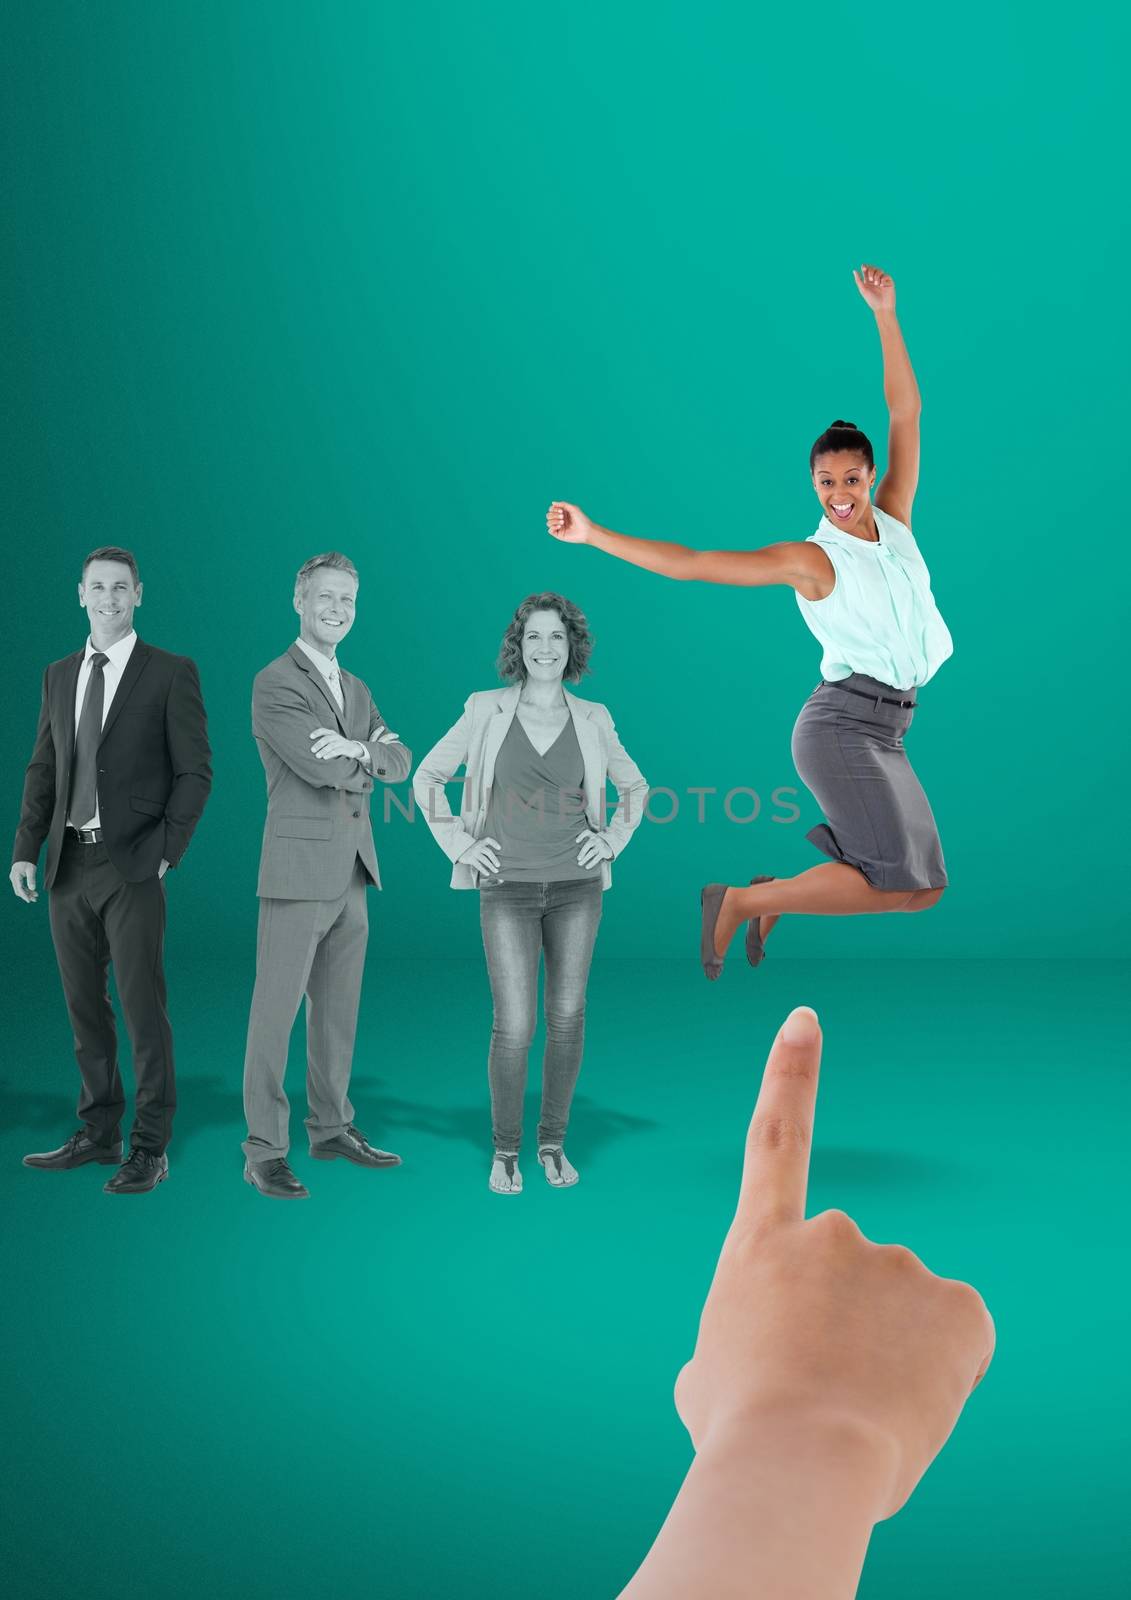 Digital composite of Hand choosing a business woman on a green background with business people